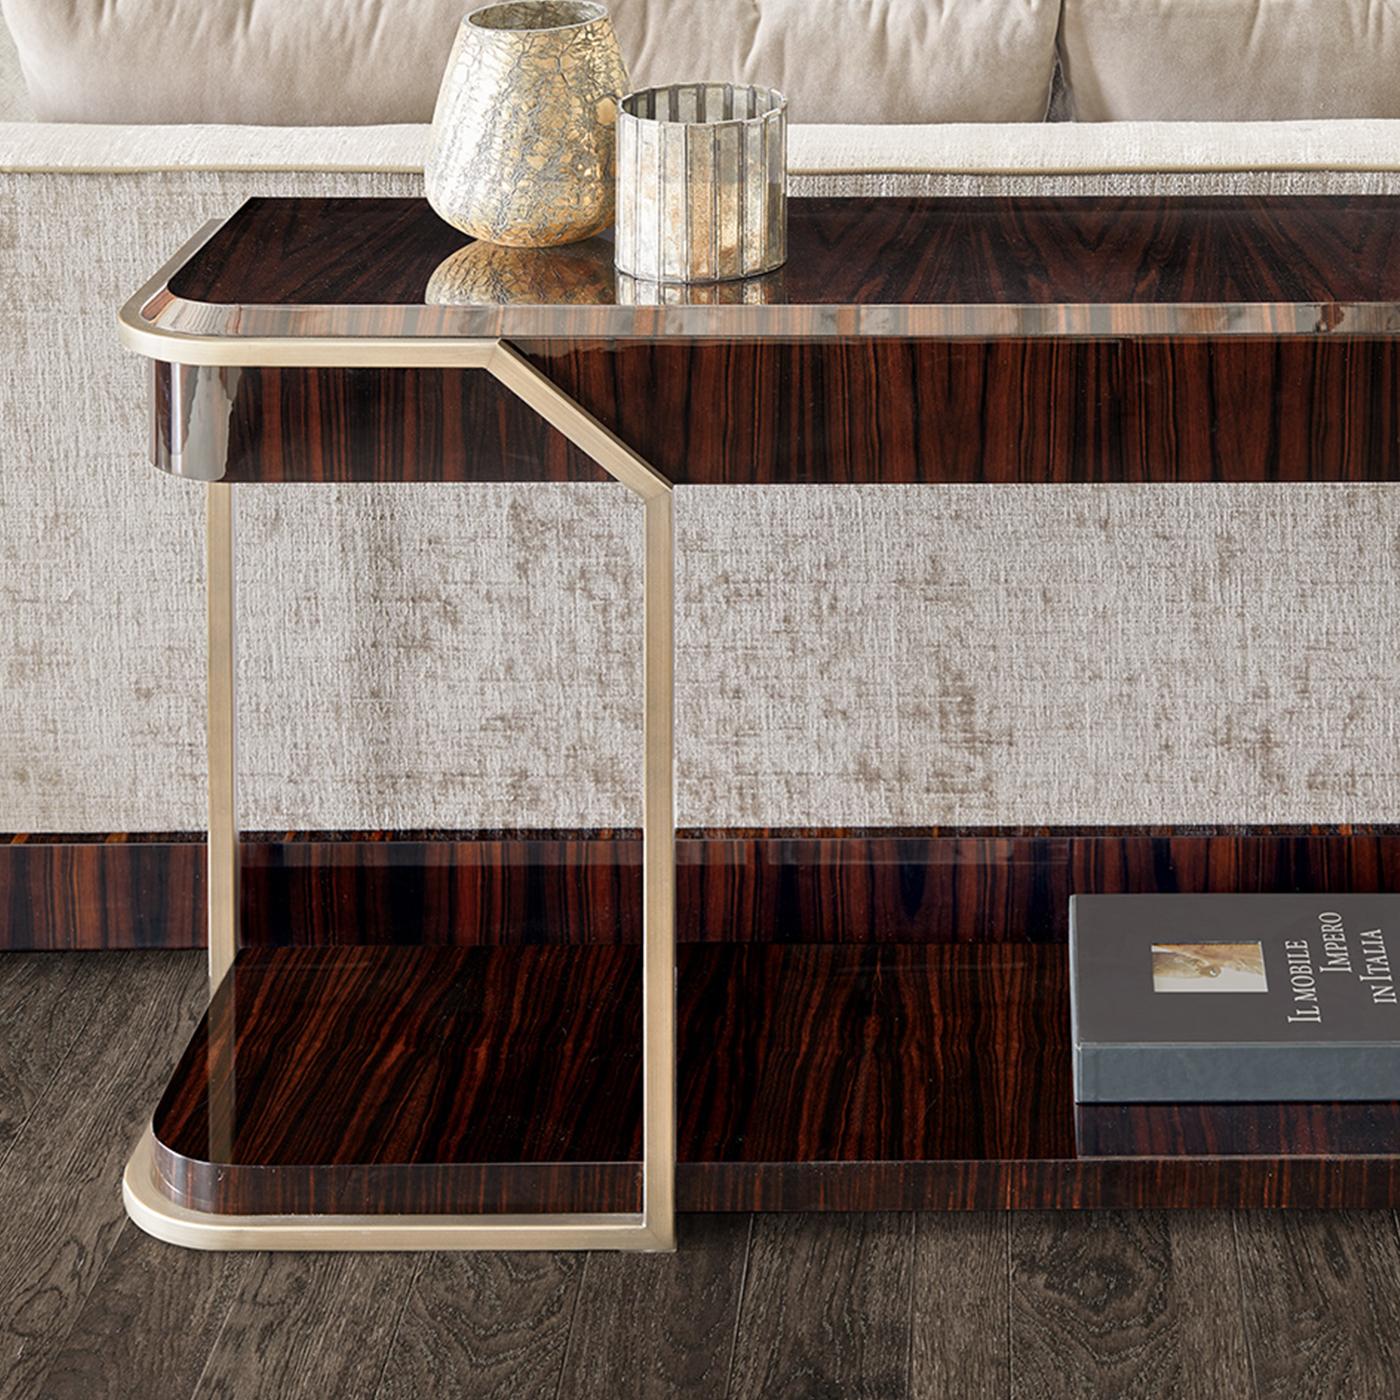 Combining vintage and contemporary vibes, the Beryl Console is a celebration of Macassar ebony wood and its striking natural grain. Given a high gloss finish to exalt its veins, the console is completed by a bronze colored frame. With a top and